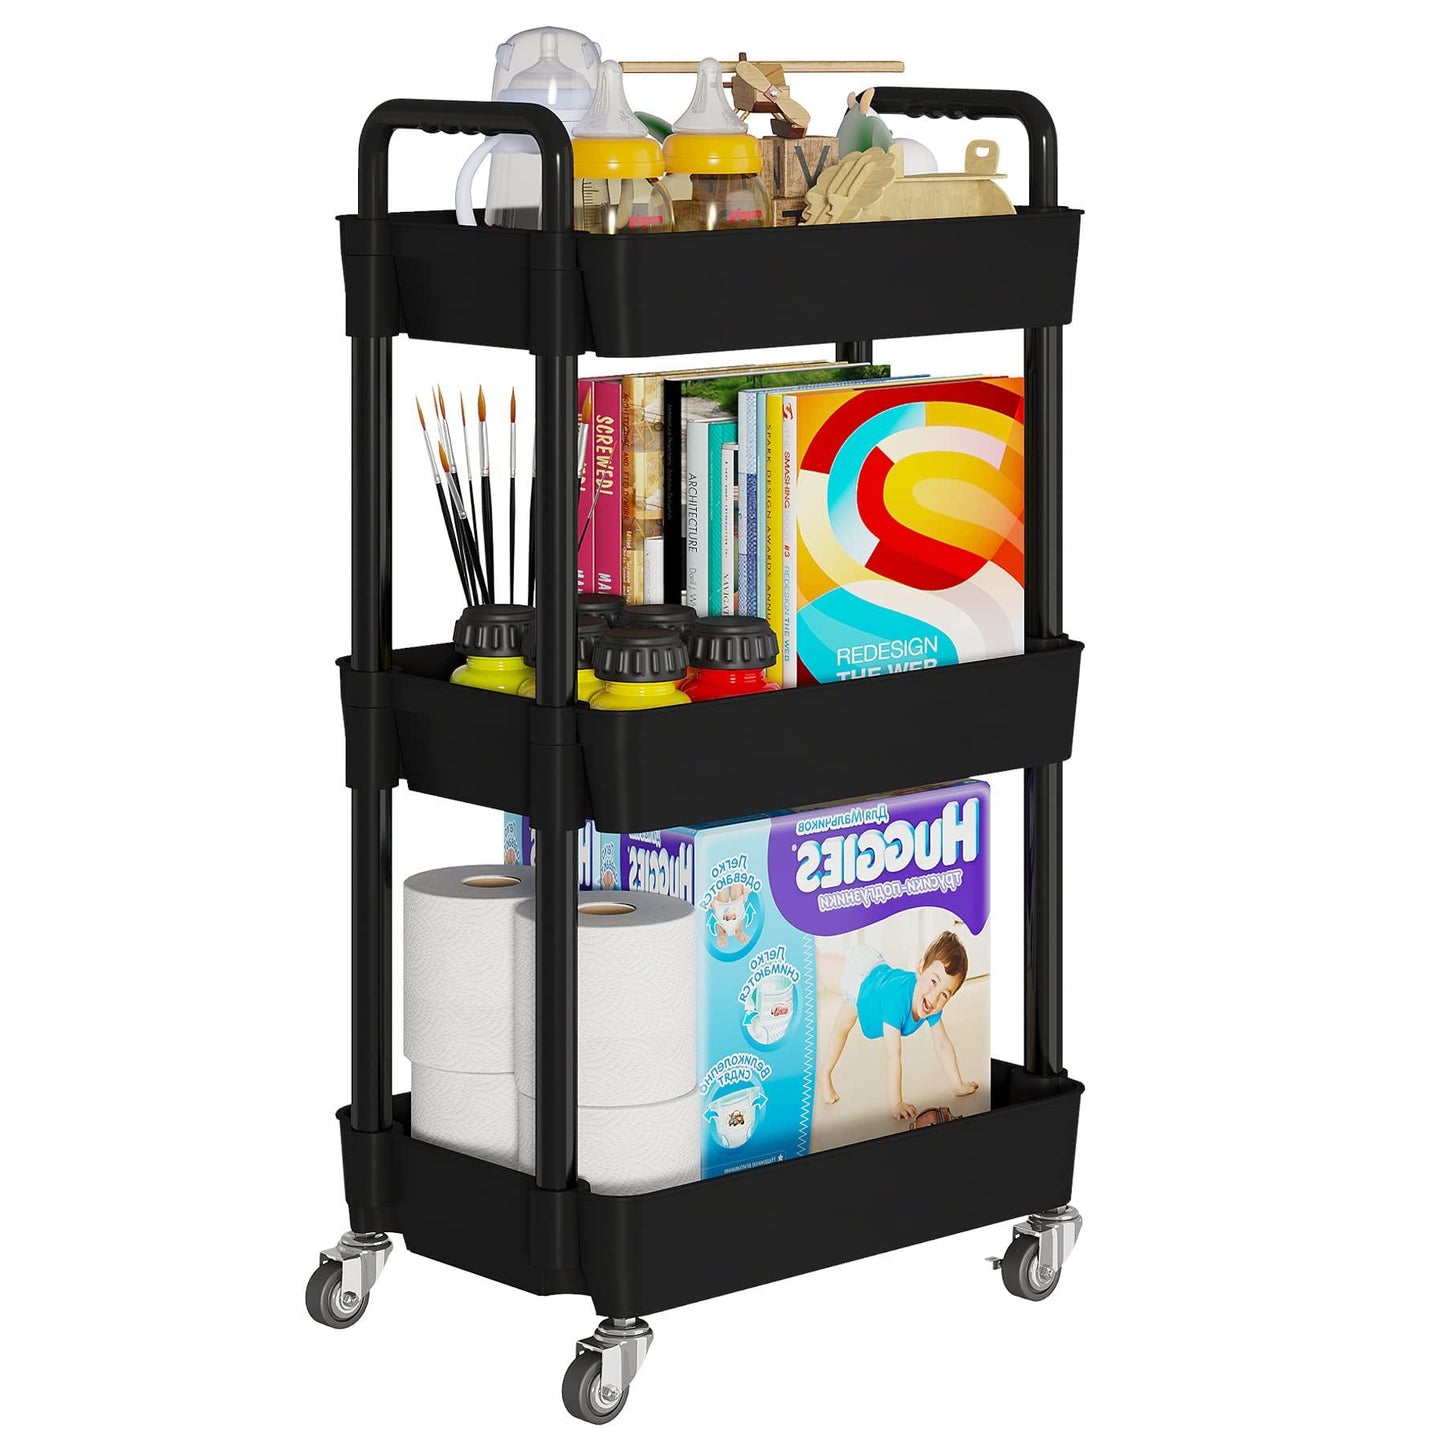 Laiensia 3-Tier Kitchen Storage Cart,Multifunction Utility Rolling Storage Organizer,Mobile Shelving Unit Cart with Lockable Wheels for Bathroom,Laundry,Living Room,With Classified Stickers,Black - CookCave